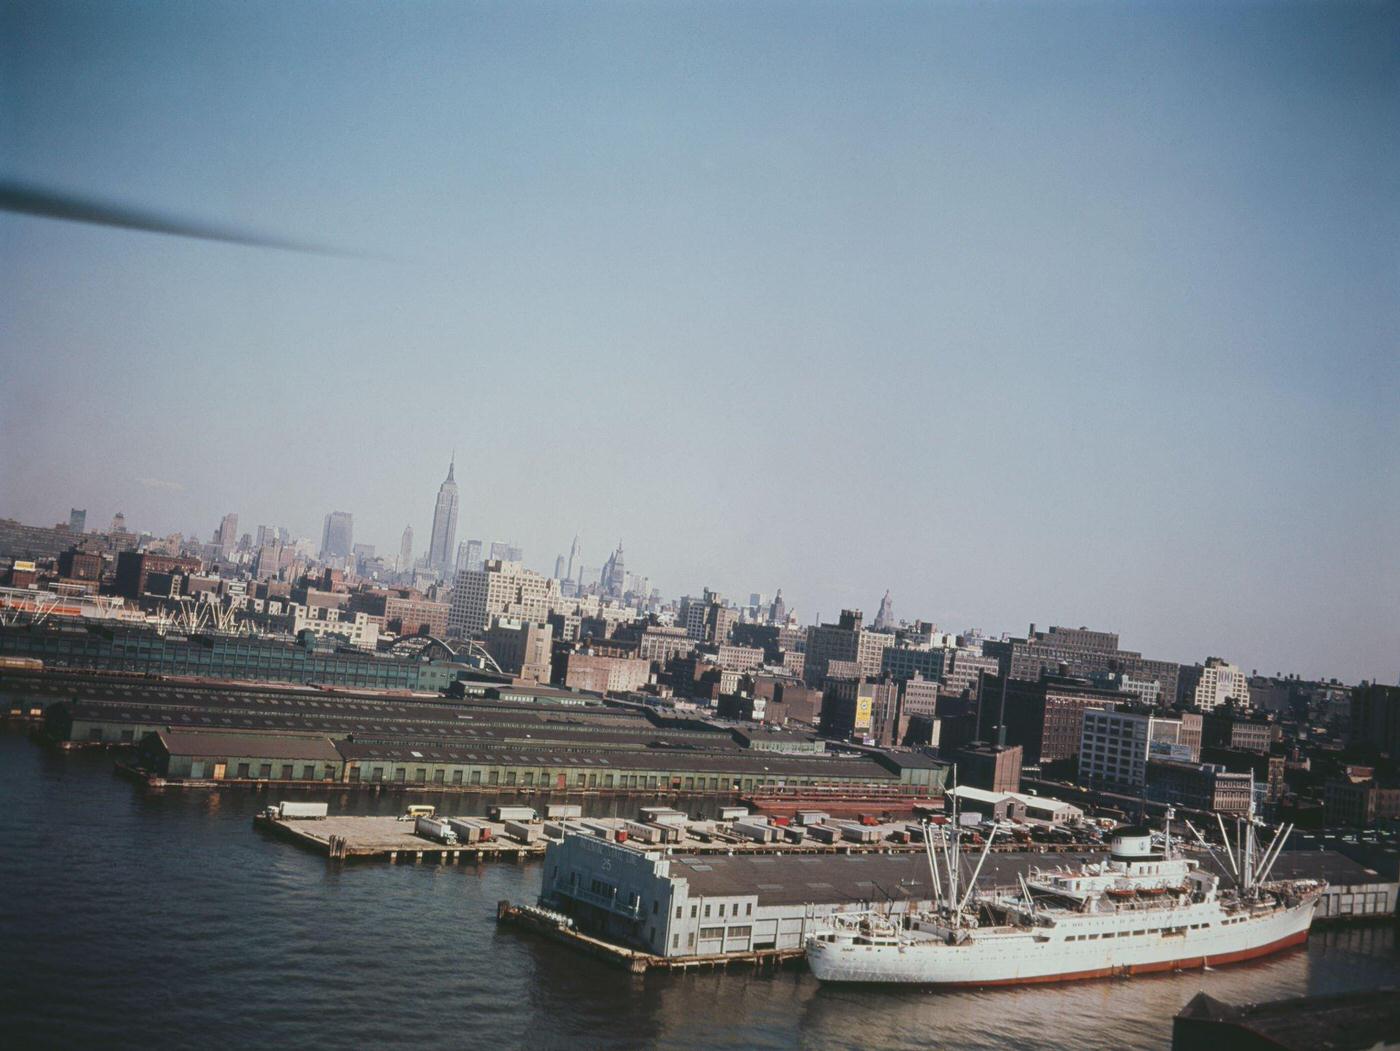 Cargo Ships And Freighters At Hudson River Side Of Manhattan Island, 1971